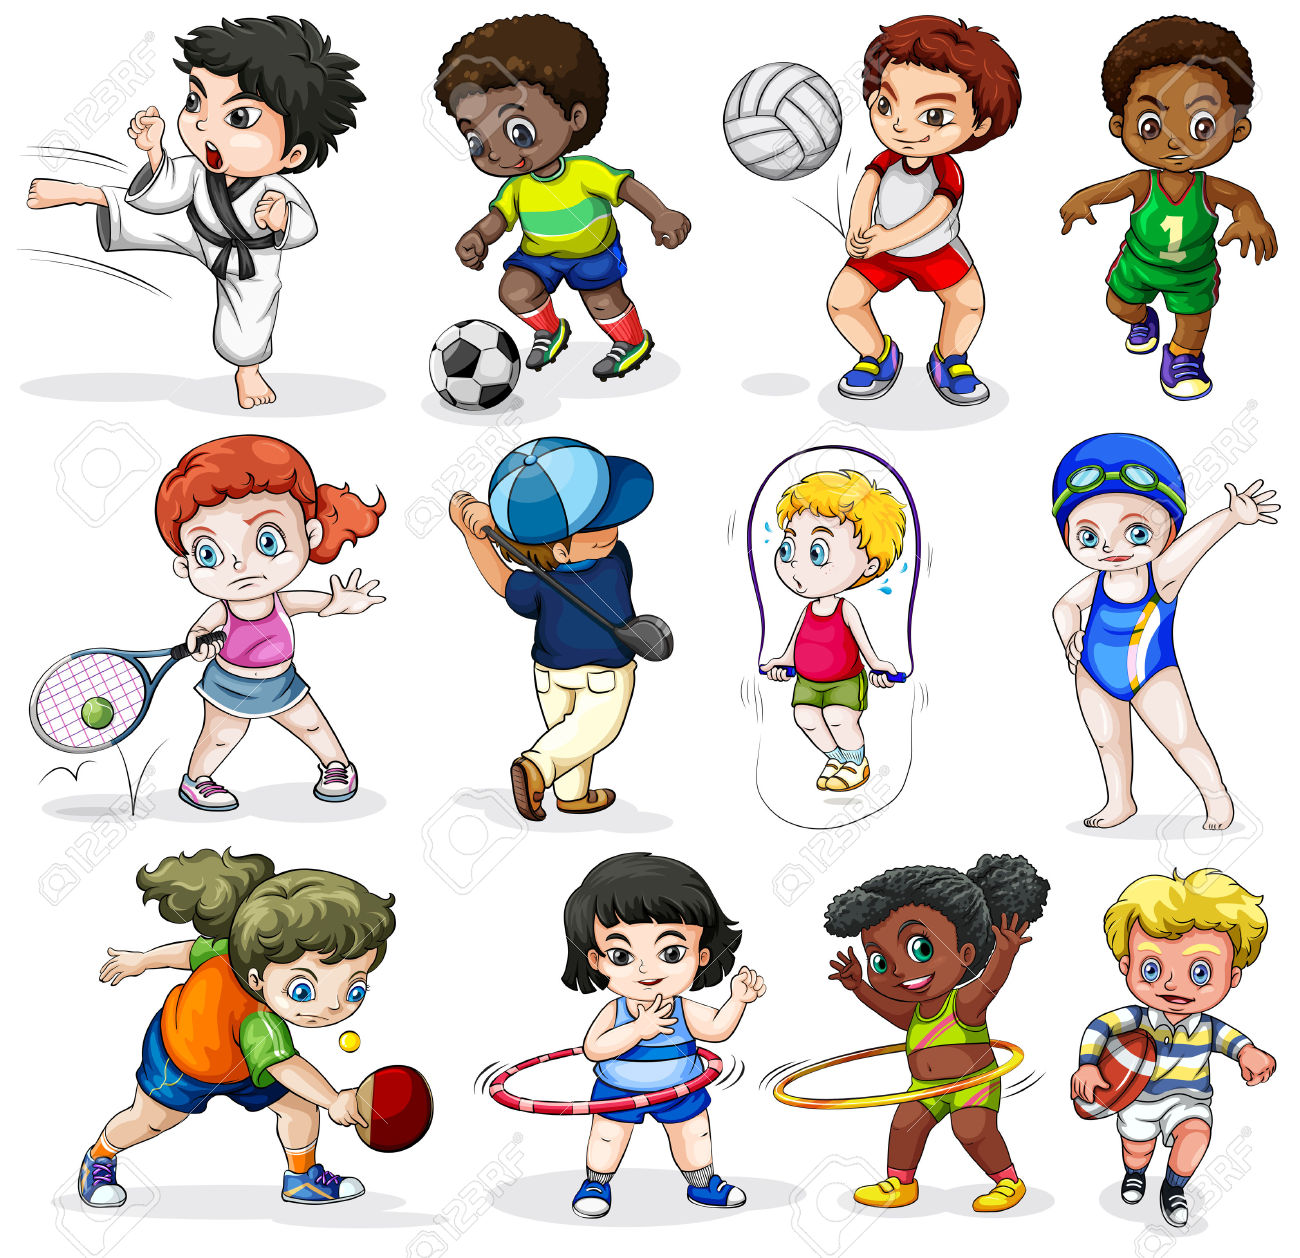 free sports clipart for mac - photo #48